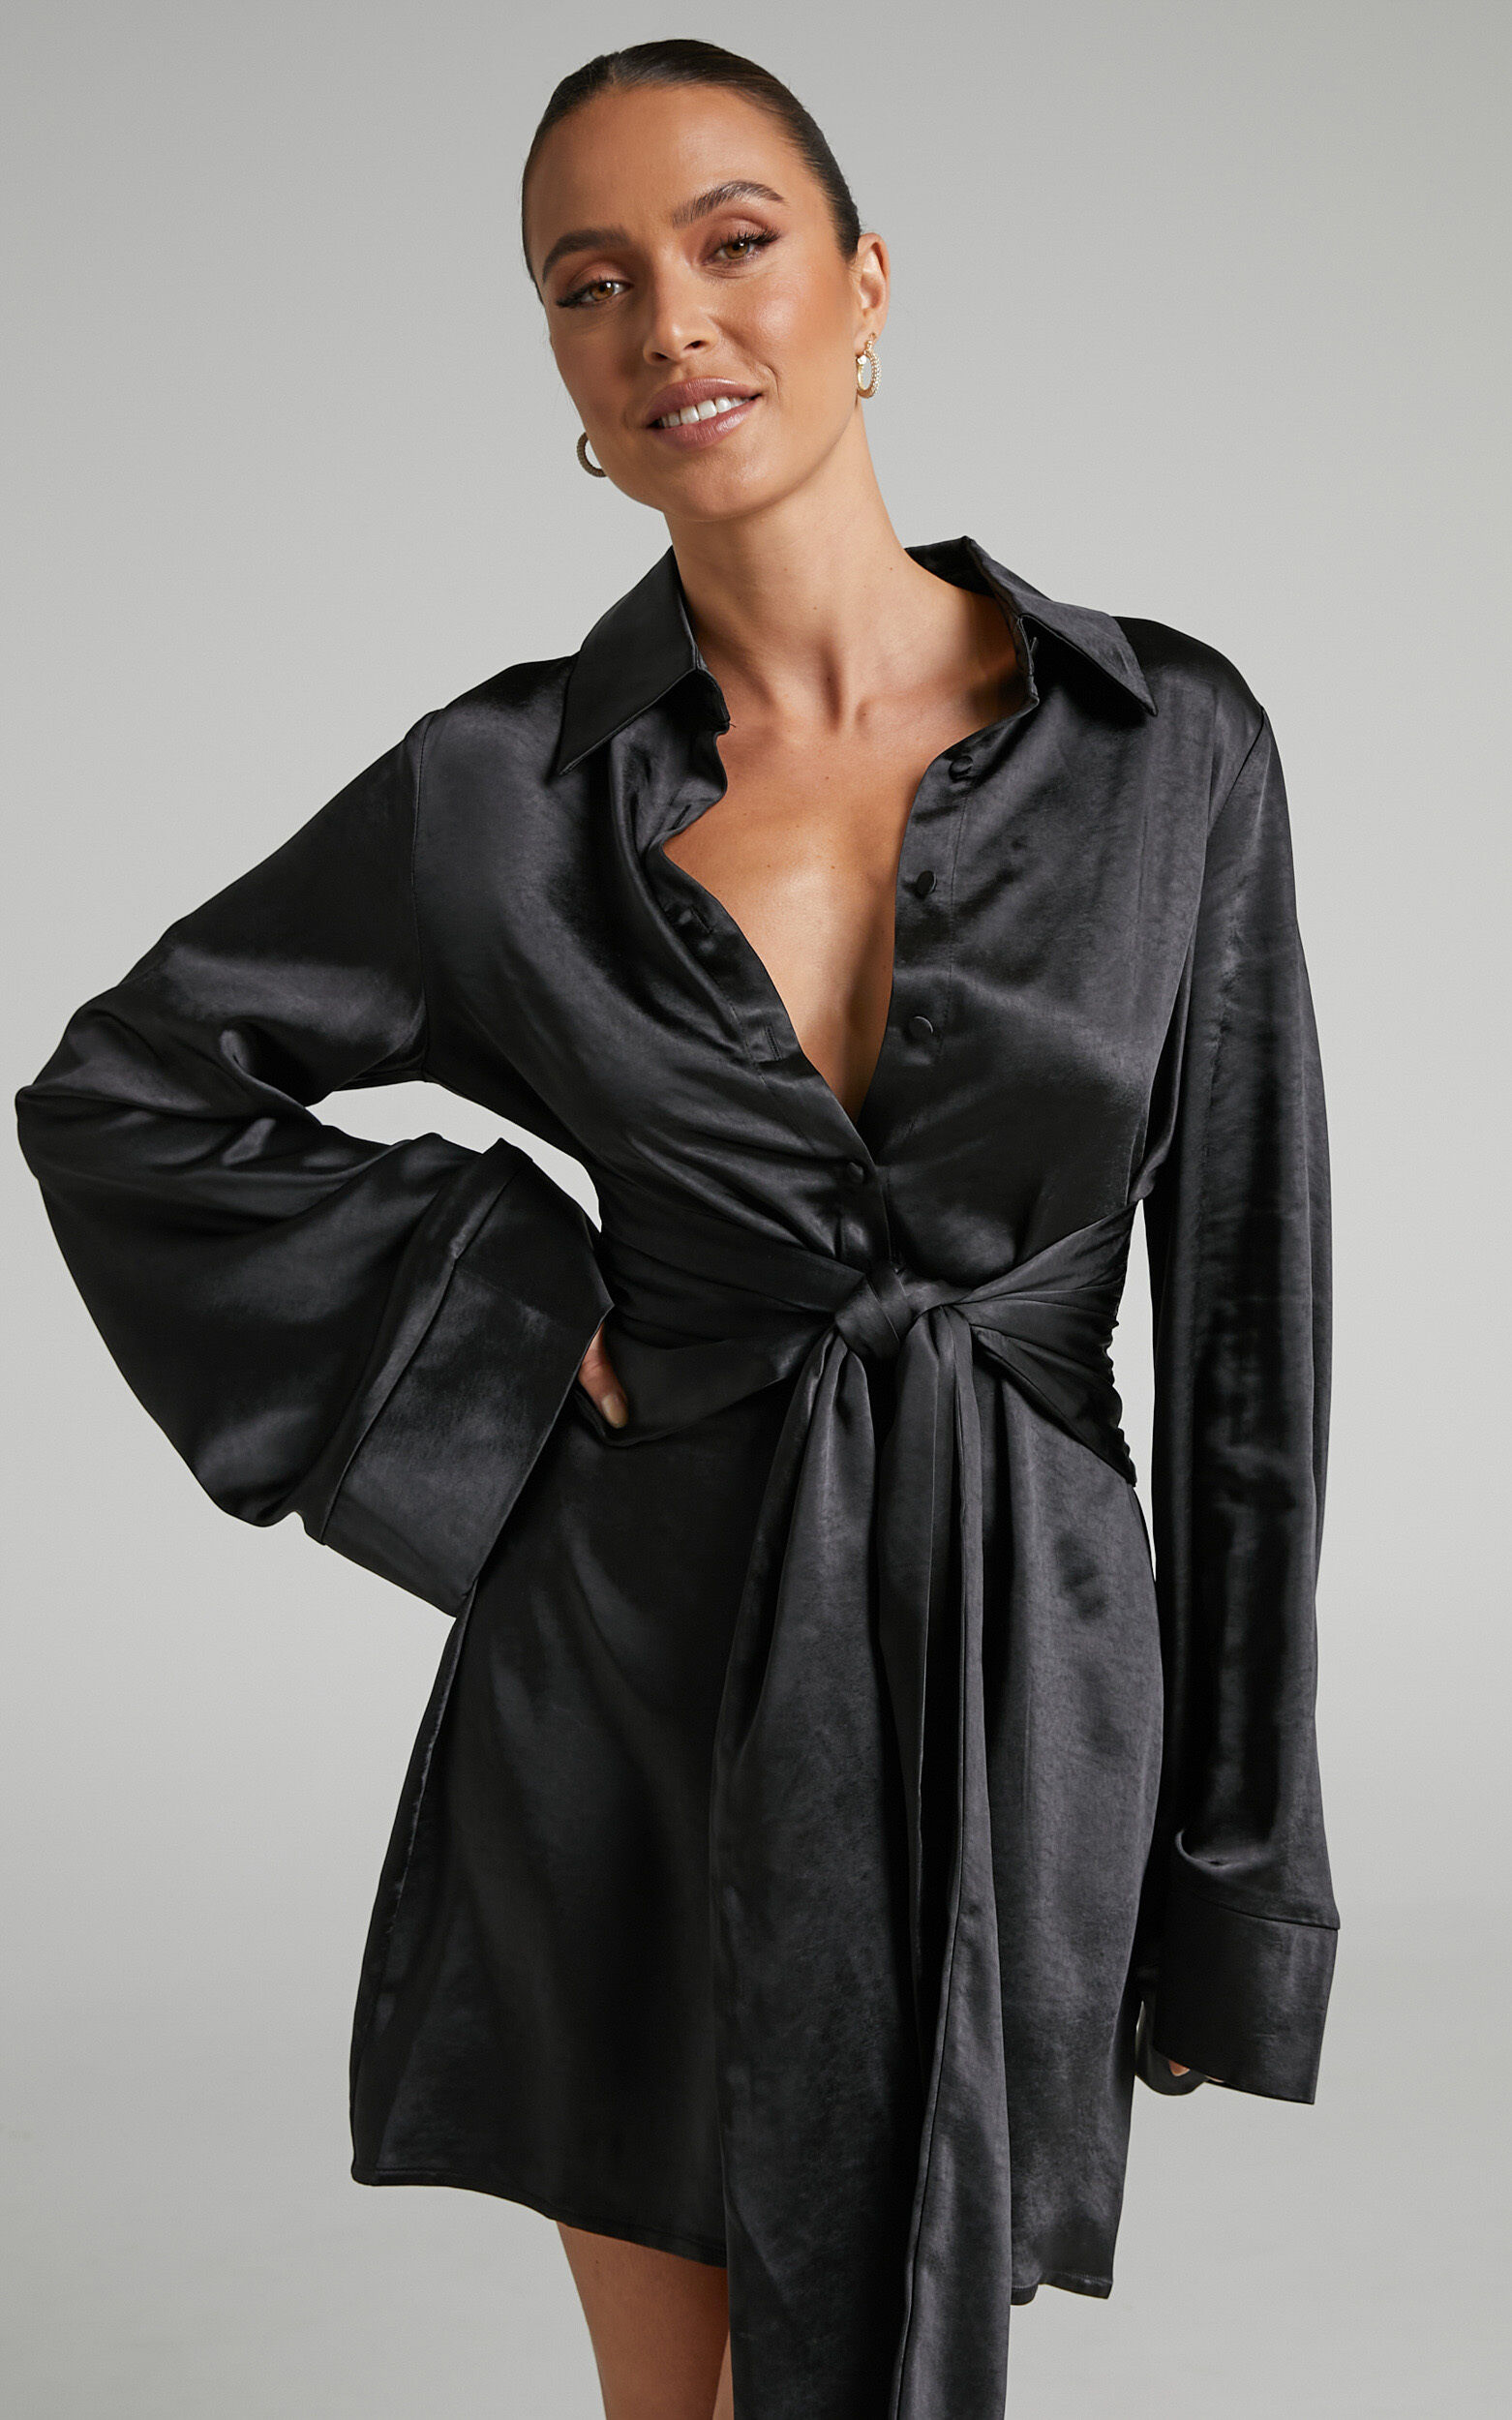 Hadid Button Down Waist Tie Shirt Dress in Black - 04, BLK1, super-hi-res image number null